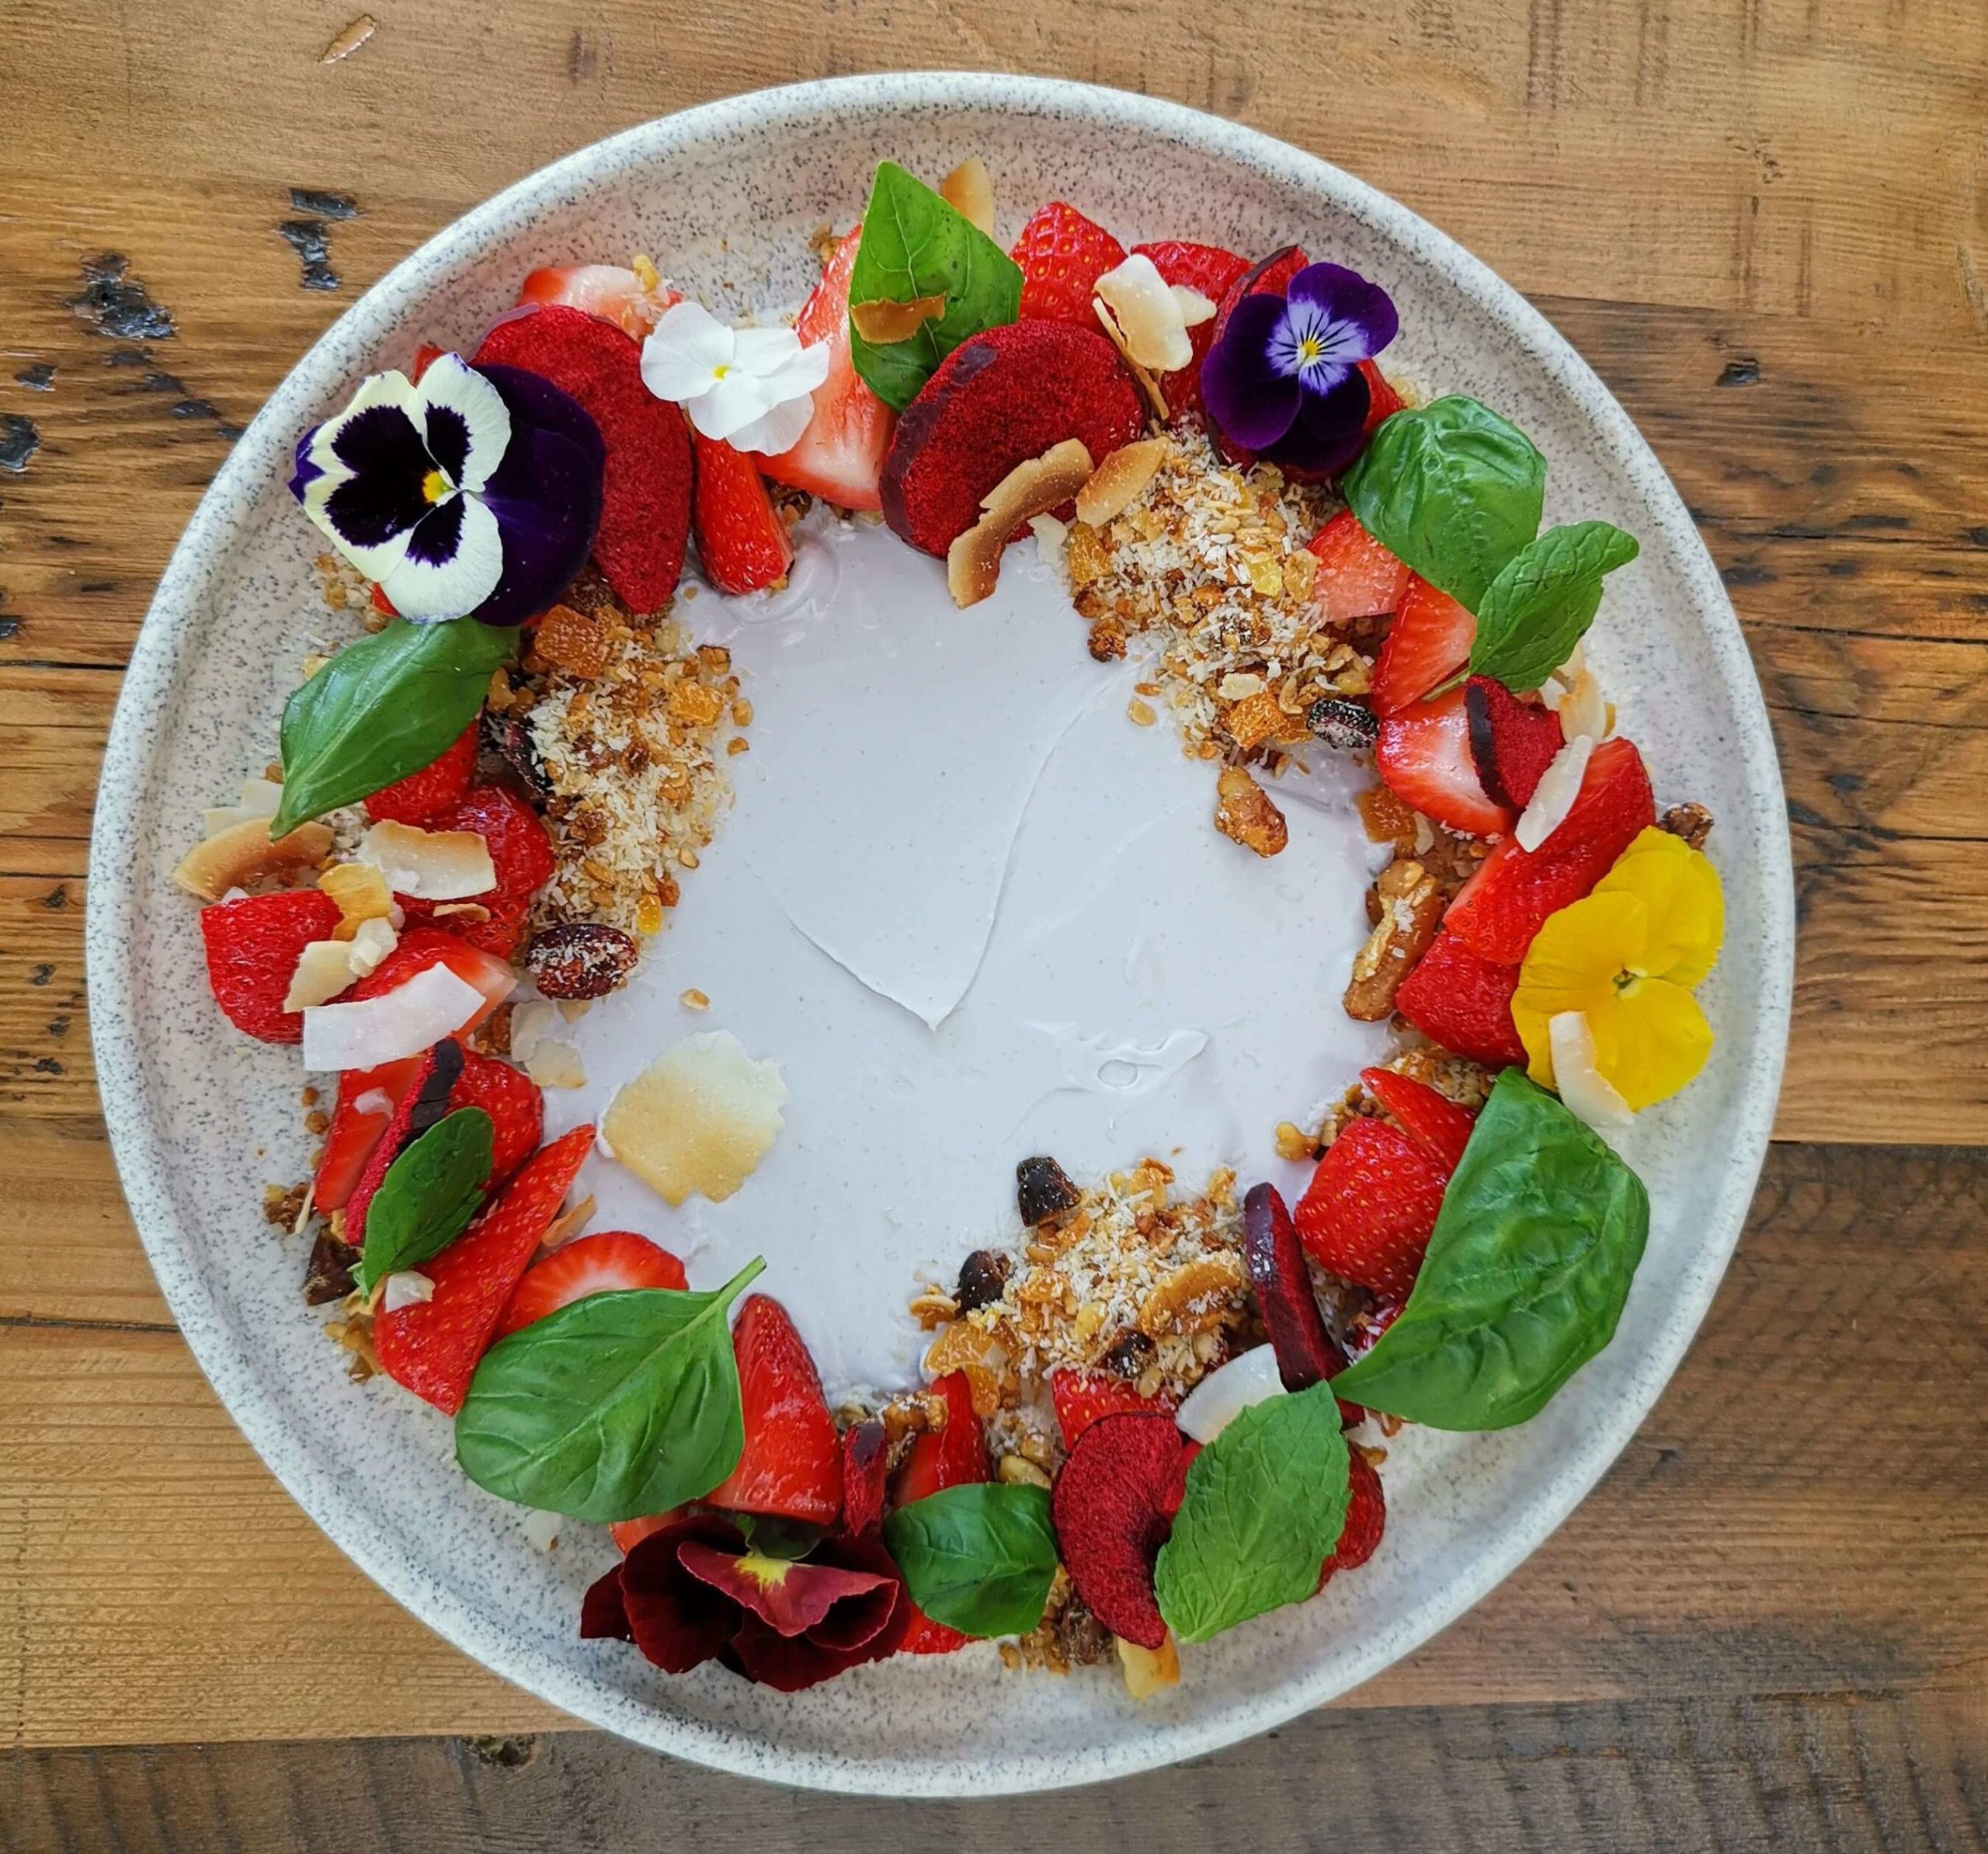 Auckland plant based eatery's Seasonal Fruit - Strawberries with basil, maple and coconut yoghurt